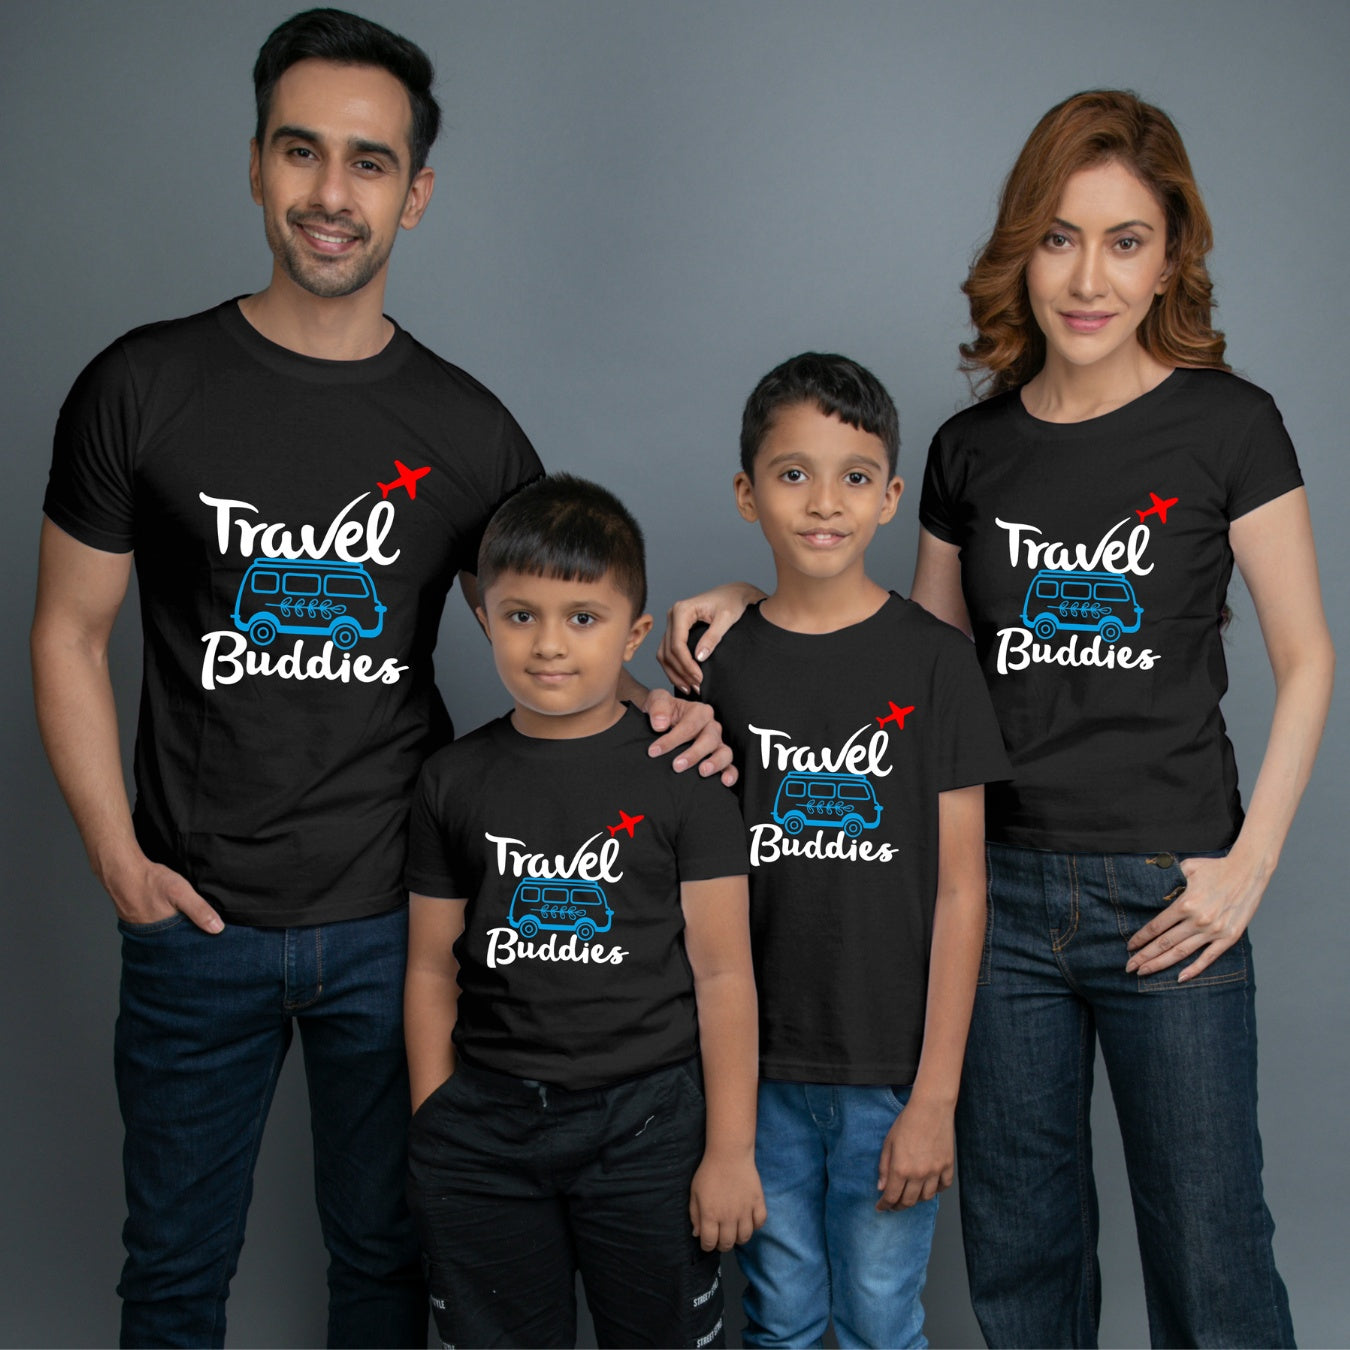 Family t shirts set of 4 Mom Dad Two Sons in Black Colour - Travel Buddies